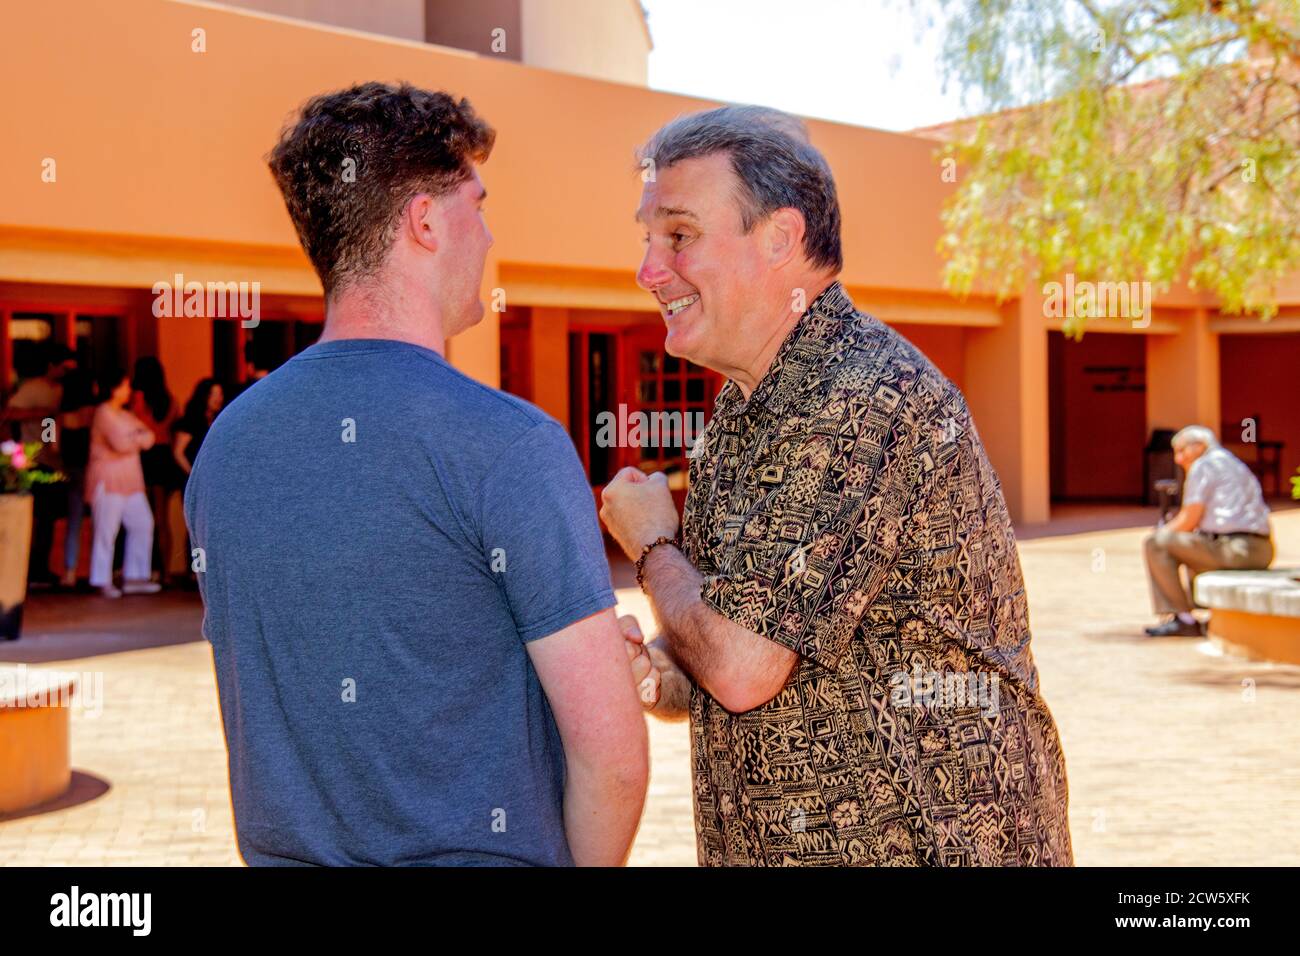 The deacon of a Southern California Catholic church greets a young adult parishioner after mass in the church courtyard. Stock Photo